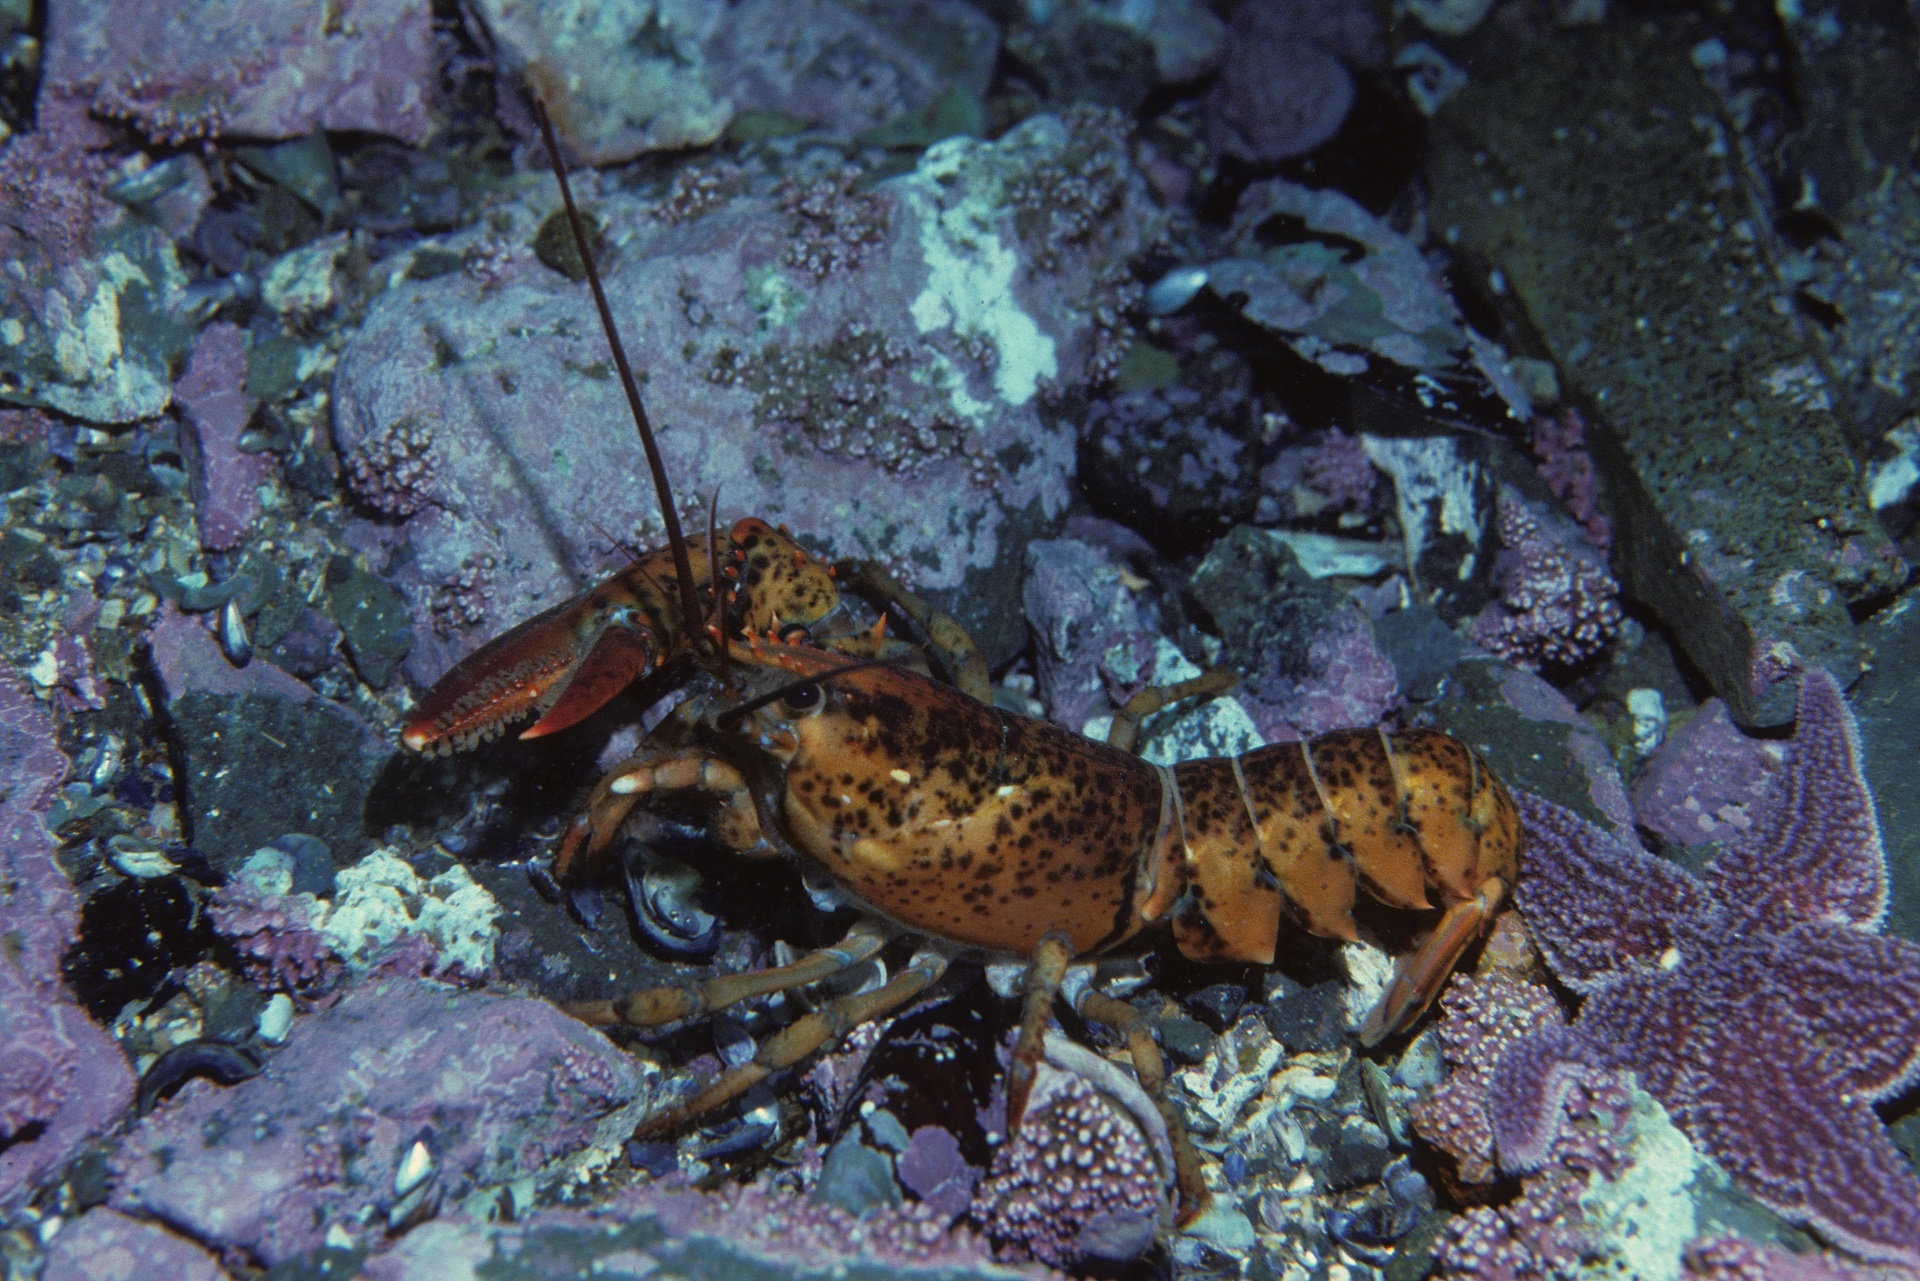 Hinterland Who's Who - North American Lobster